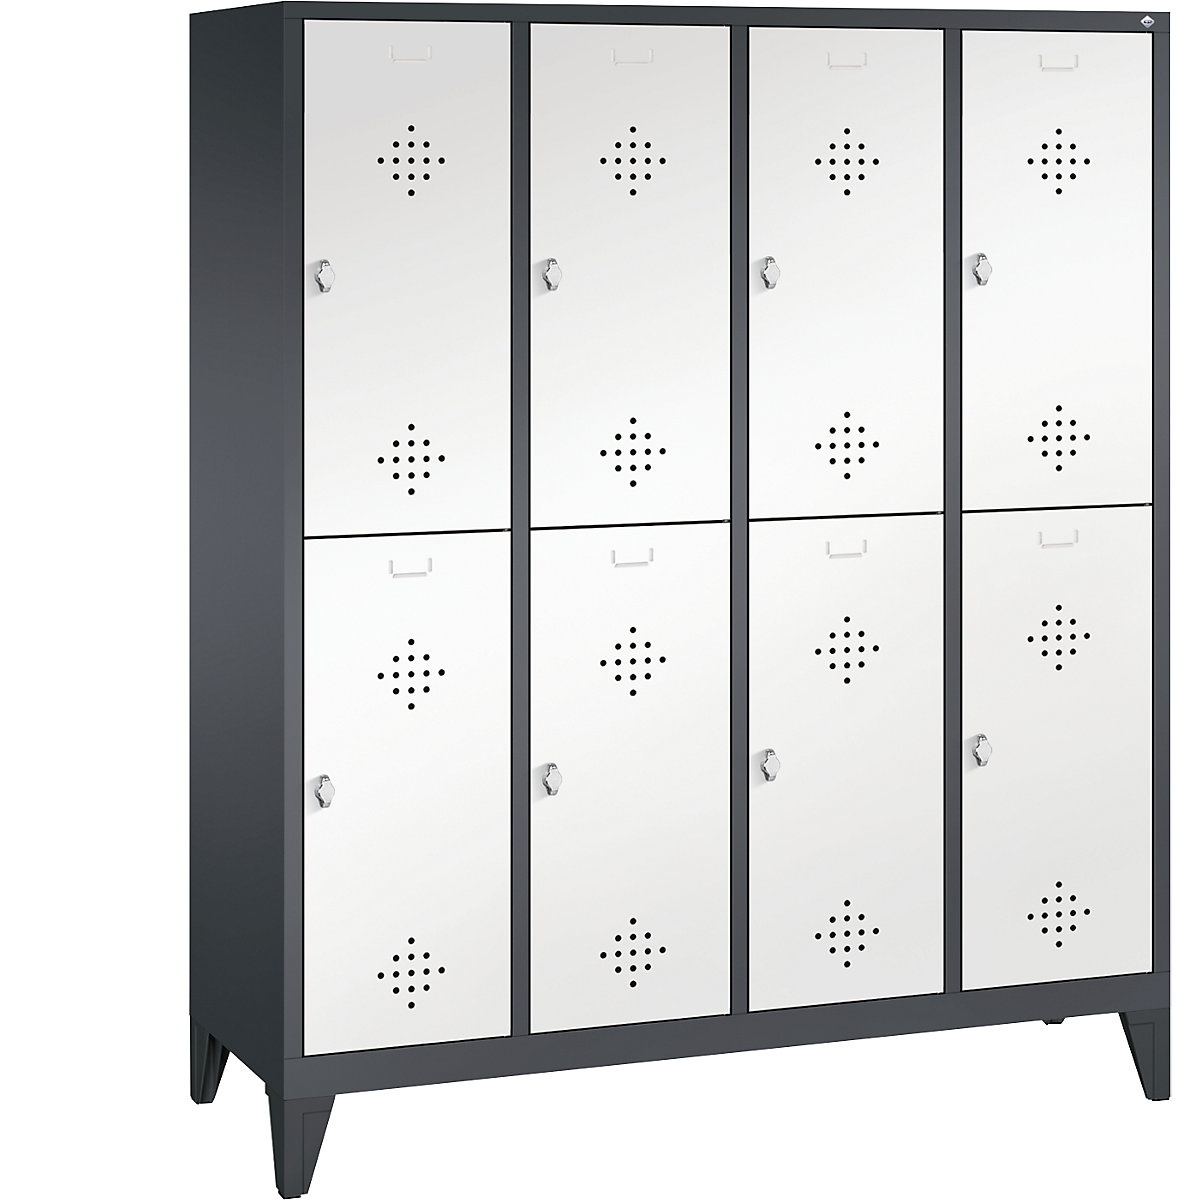 CLASSIC cloakroom locker with feet, double tier – C+P, 4 compartments, 2 shelf compartments each, compartment width 400 mm, black grey / traffic white-10